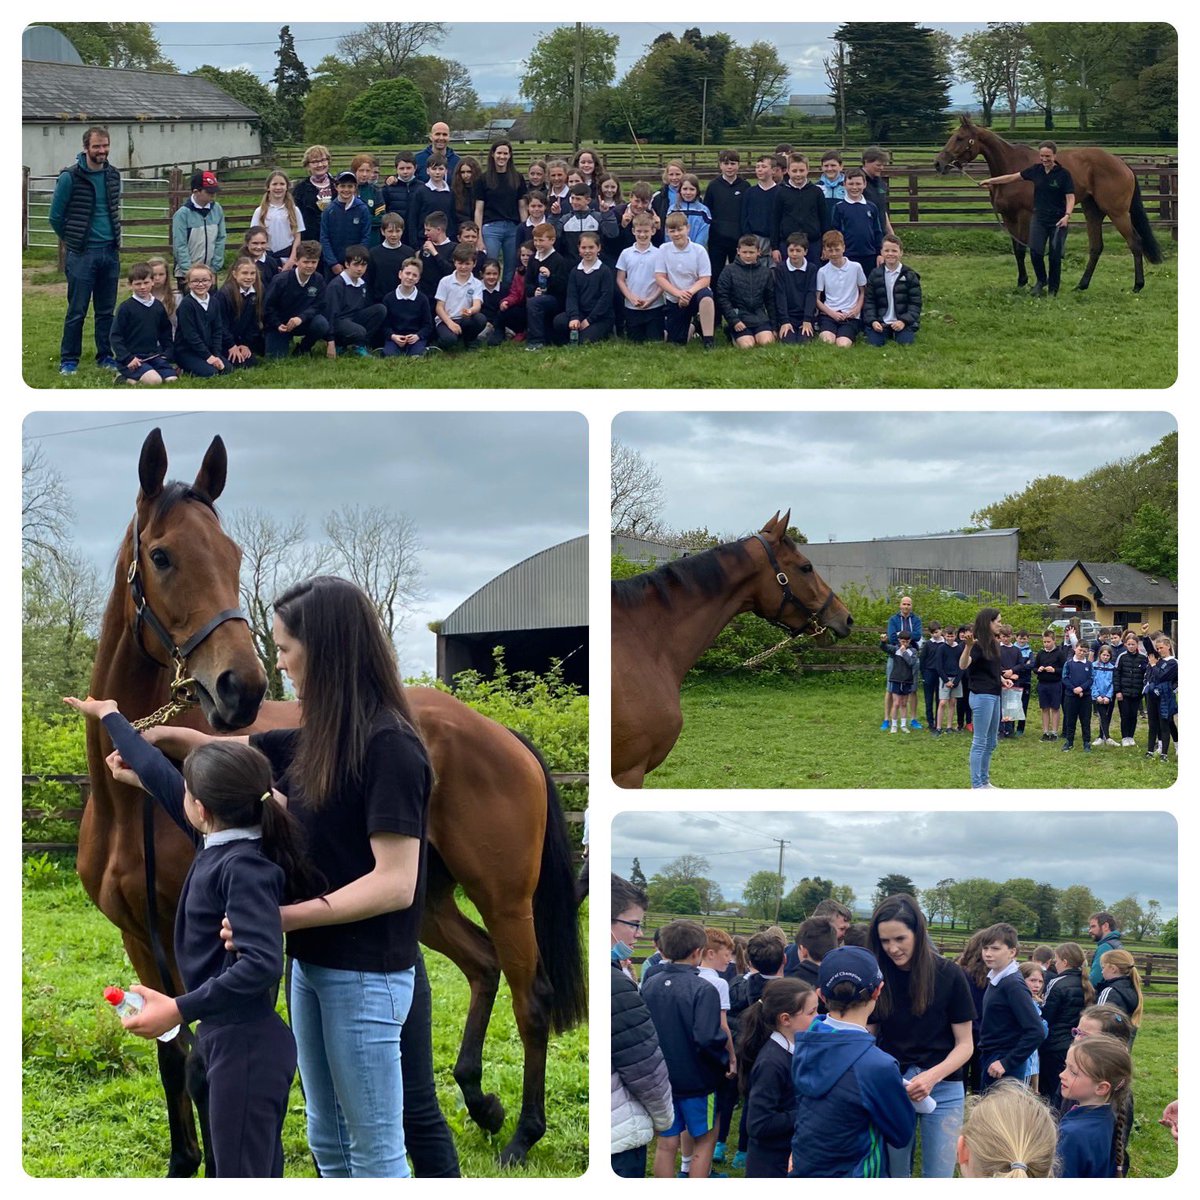 Wonderful to have the kids of Manister National School to Rathmore to welcome Honeysuckle back from @HenrydeBromhead for her summer holidays!! And look who turned up to meet them all!! @rachaelblackmor 🤩 👸 👸 🏆 🌟 2 stars, 2 queens of racing @HRIOwners @HRIRacing